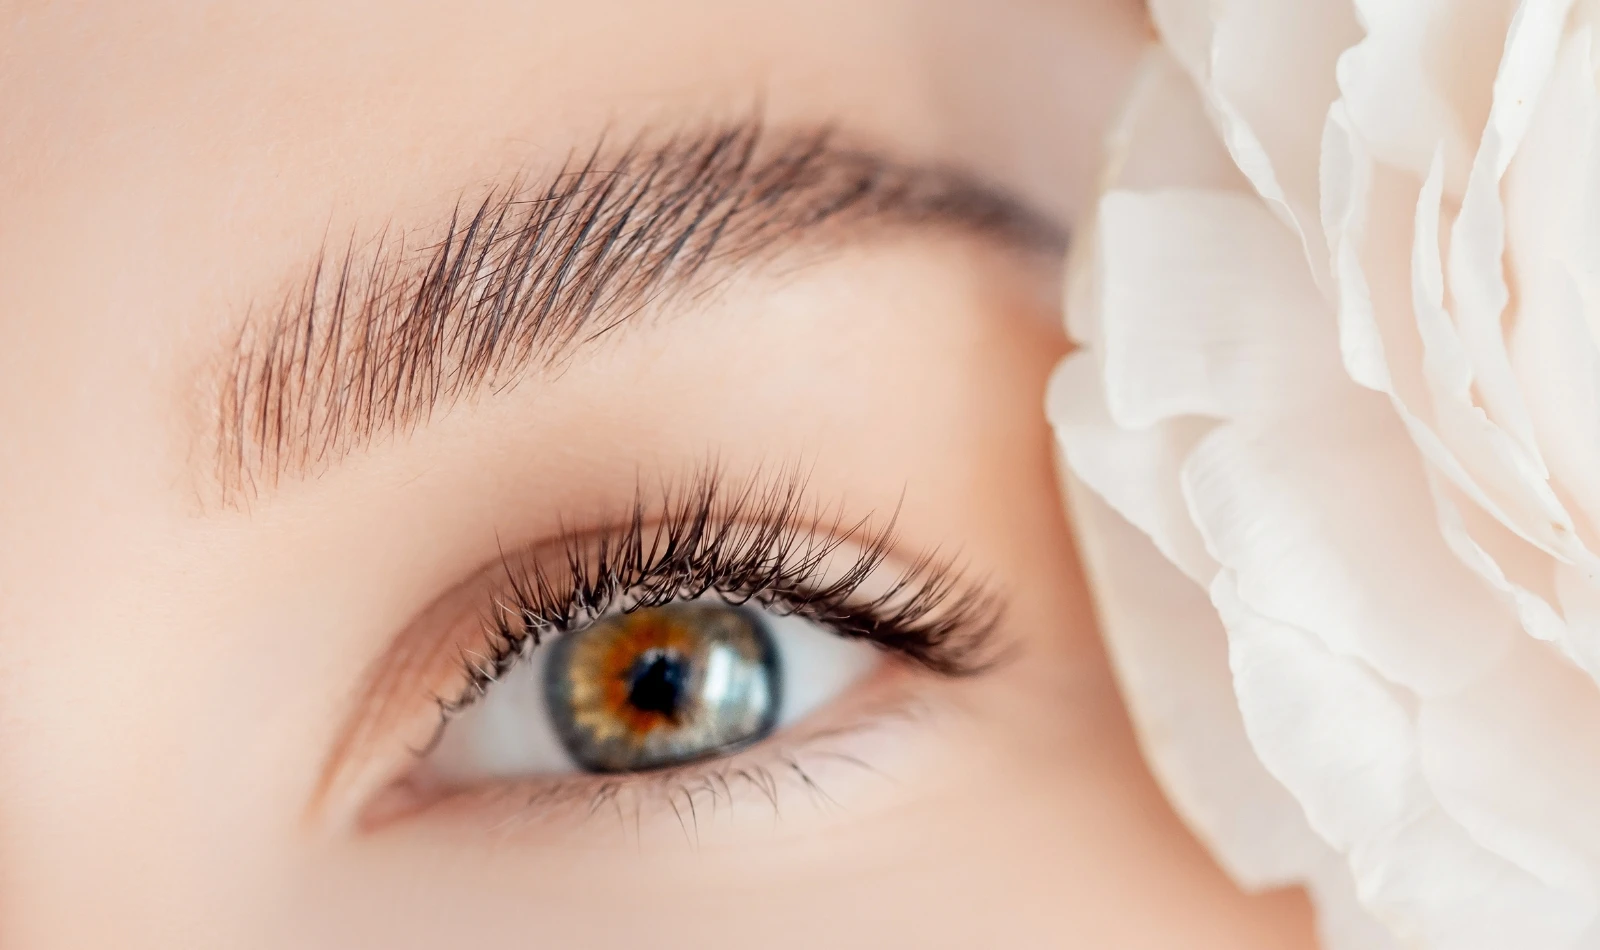 A Helping Hand With Tips for Running a Successful Microblading Business in Your Restaurant